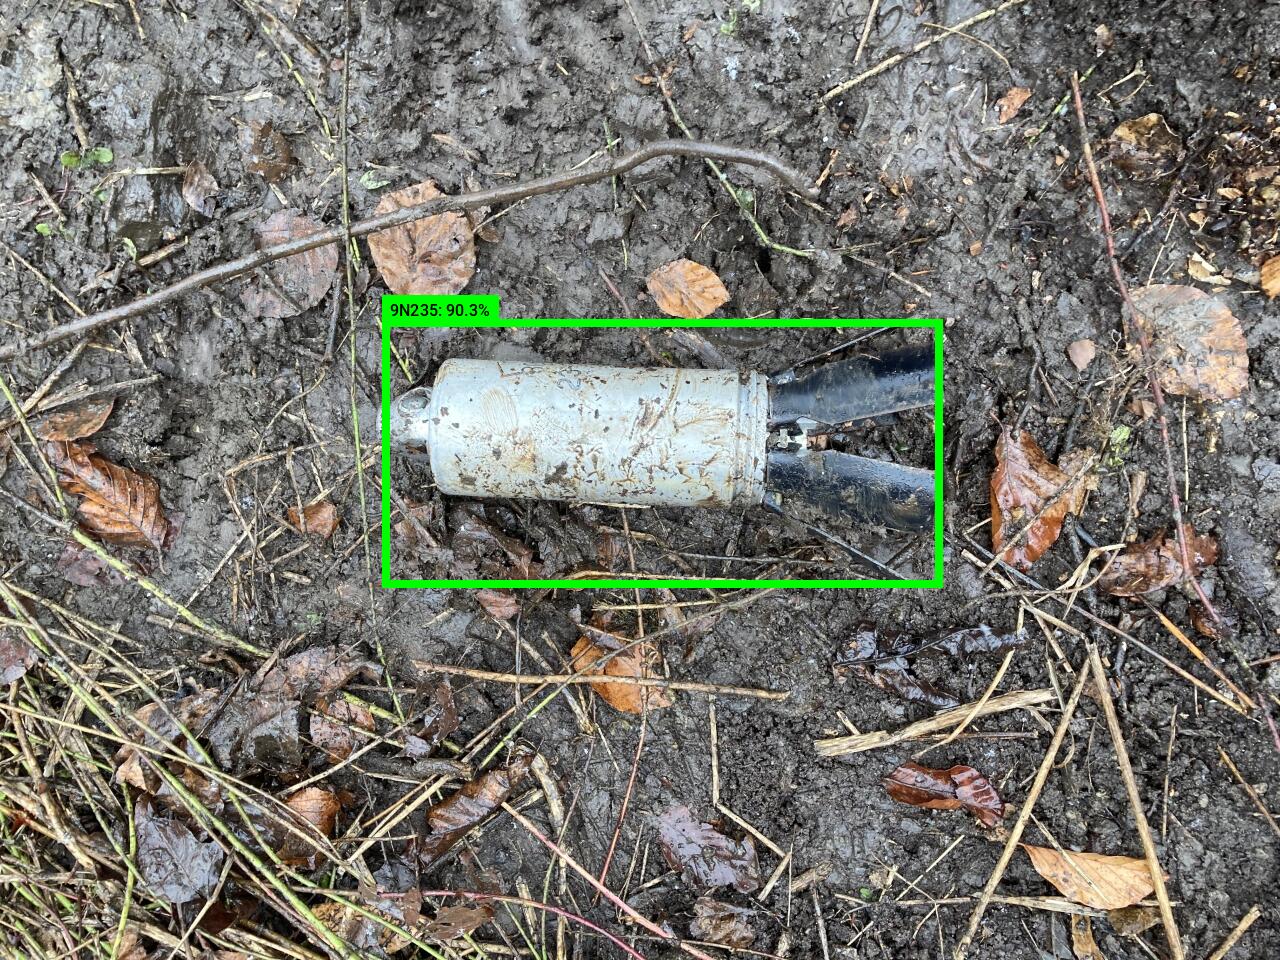 Object detection results on the 9N235/9N210 submunition. © 2022 Adam Harvey